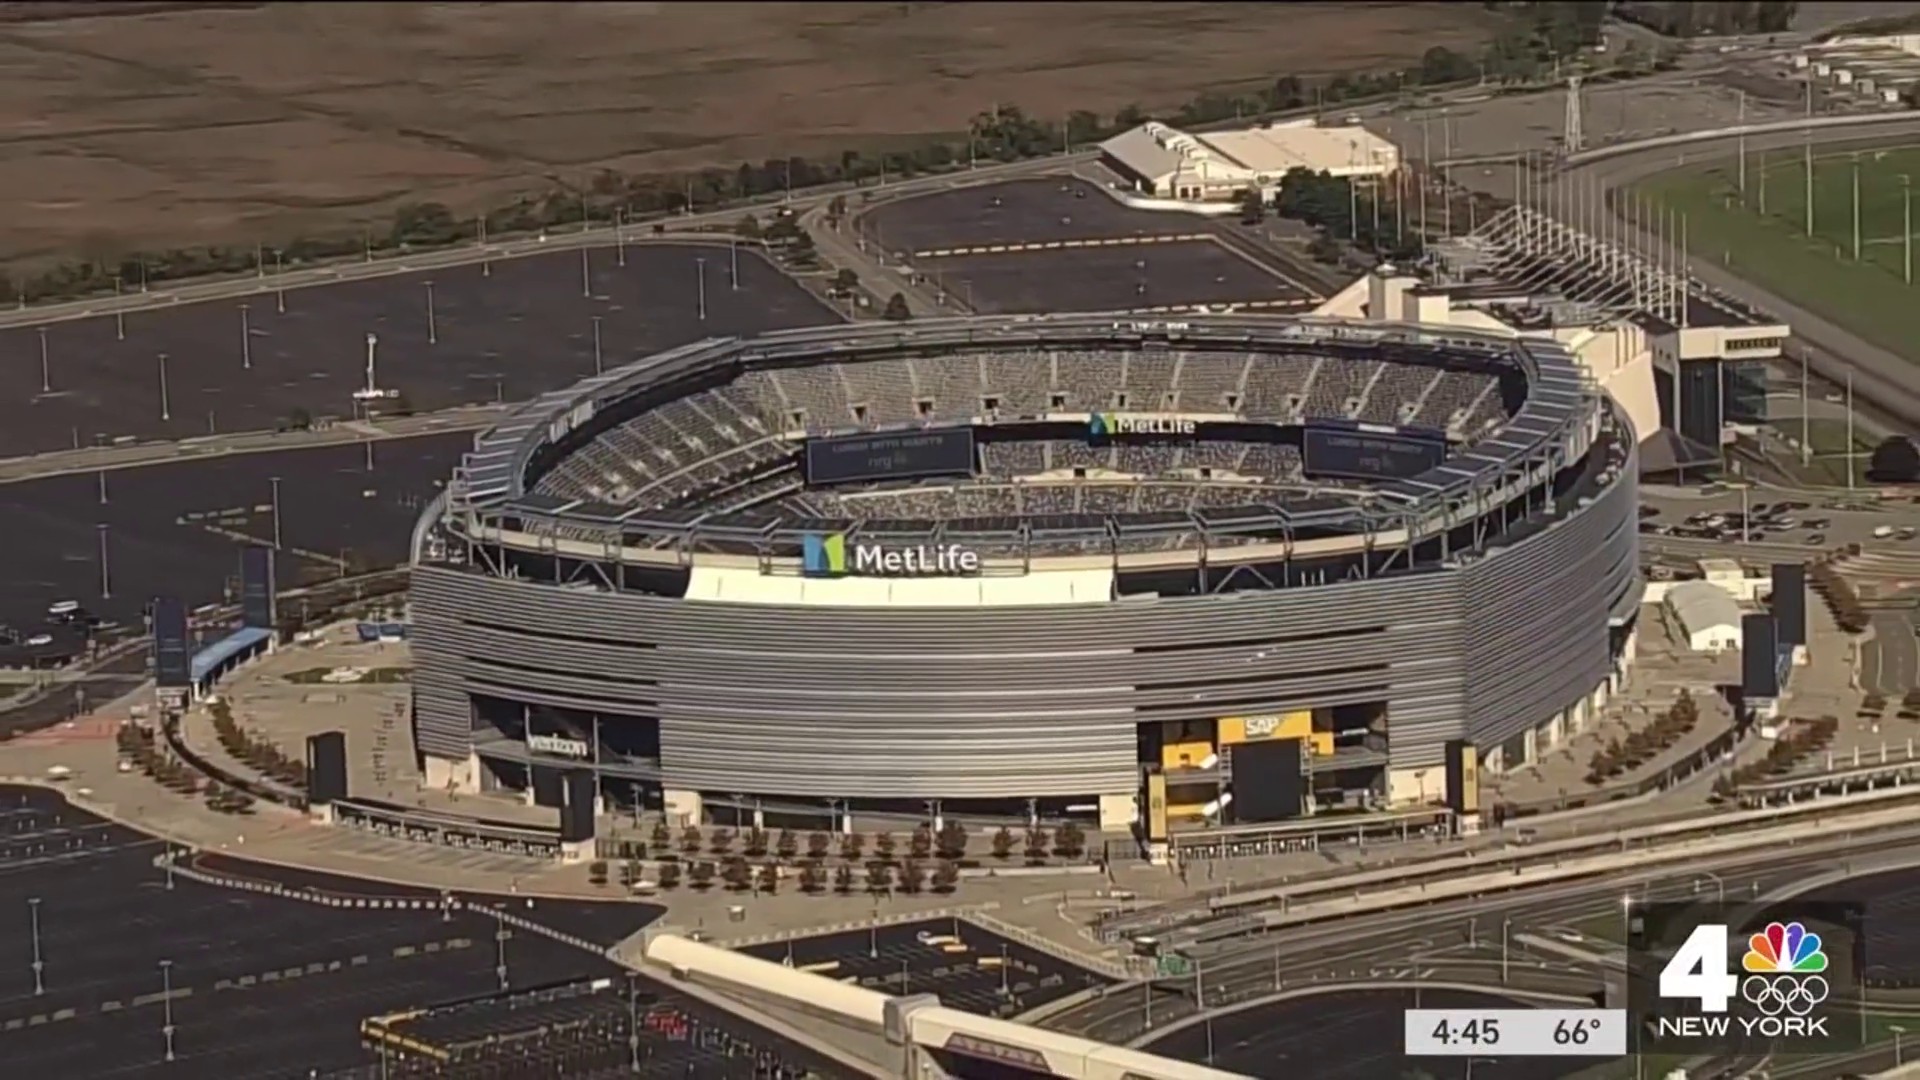 Closed for years, the legendary arena in the Meadowlands has found